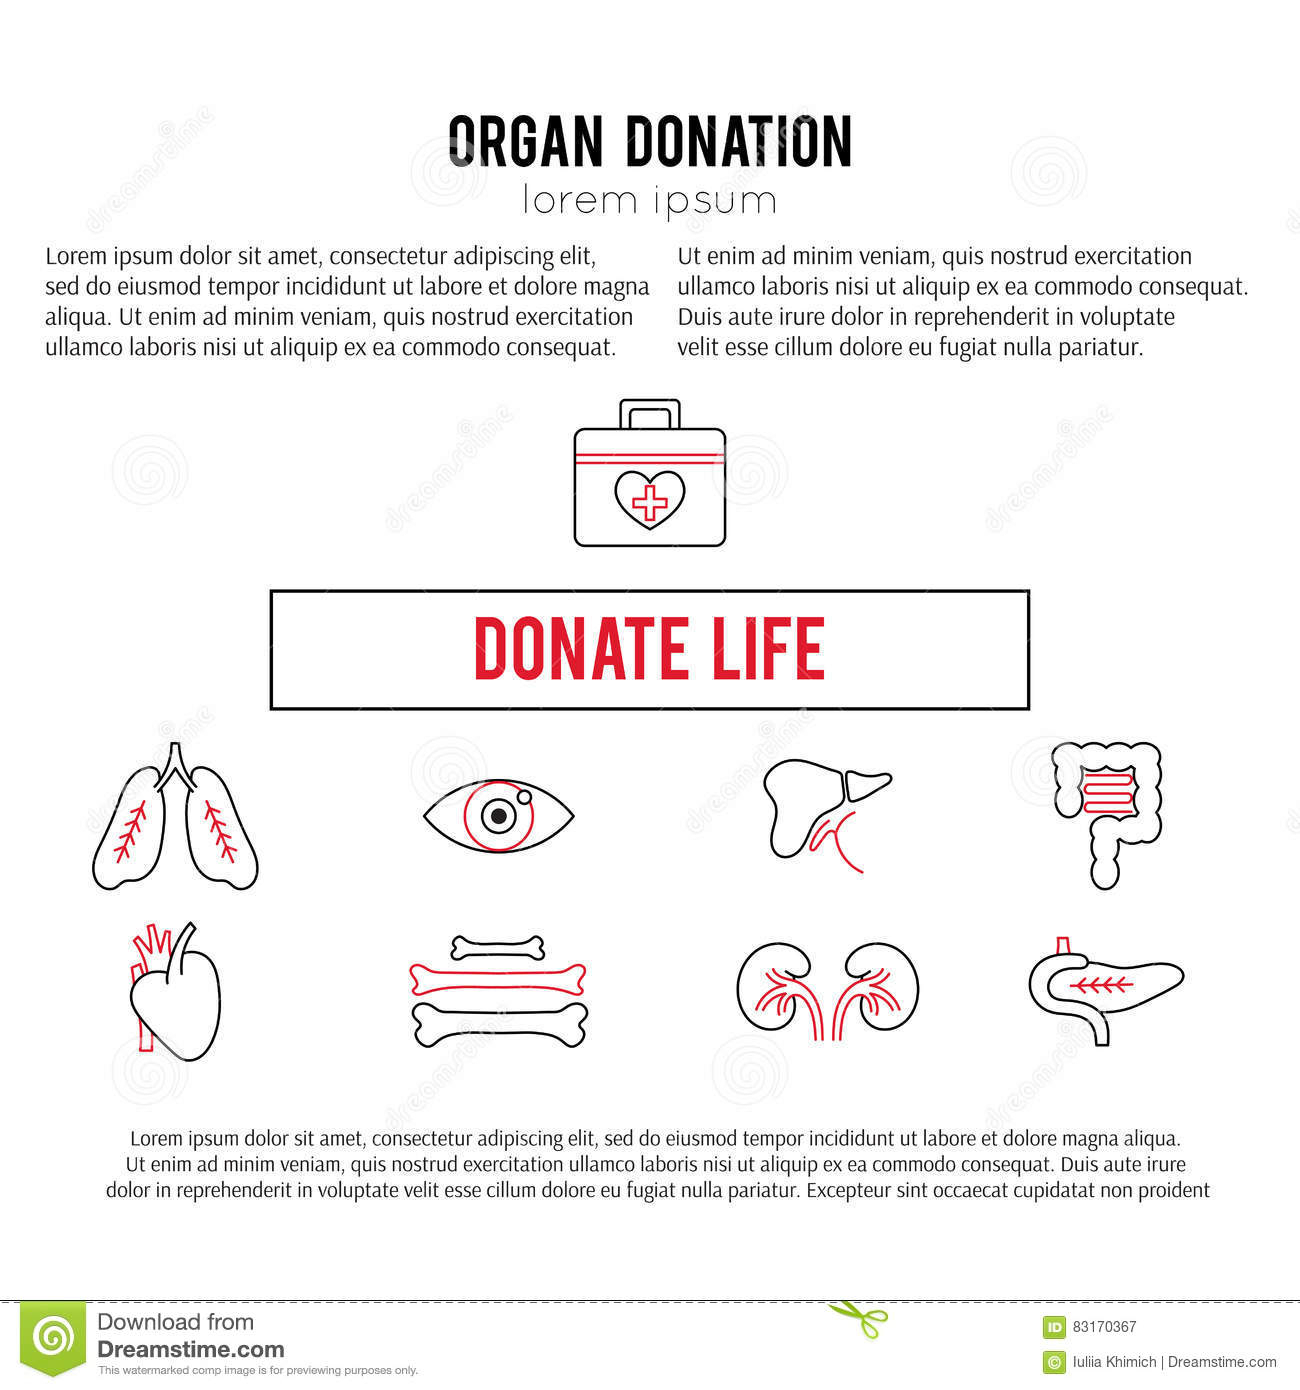 Organ Donation Template Stock Vector. Illustration Of Lung With Organ Donor Card Template